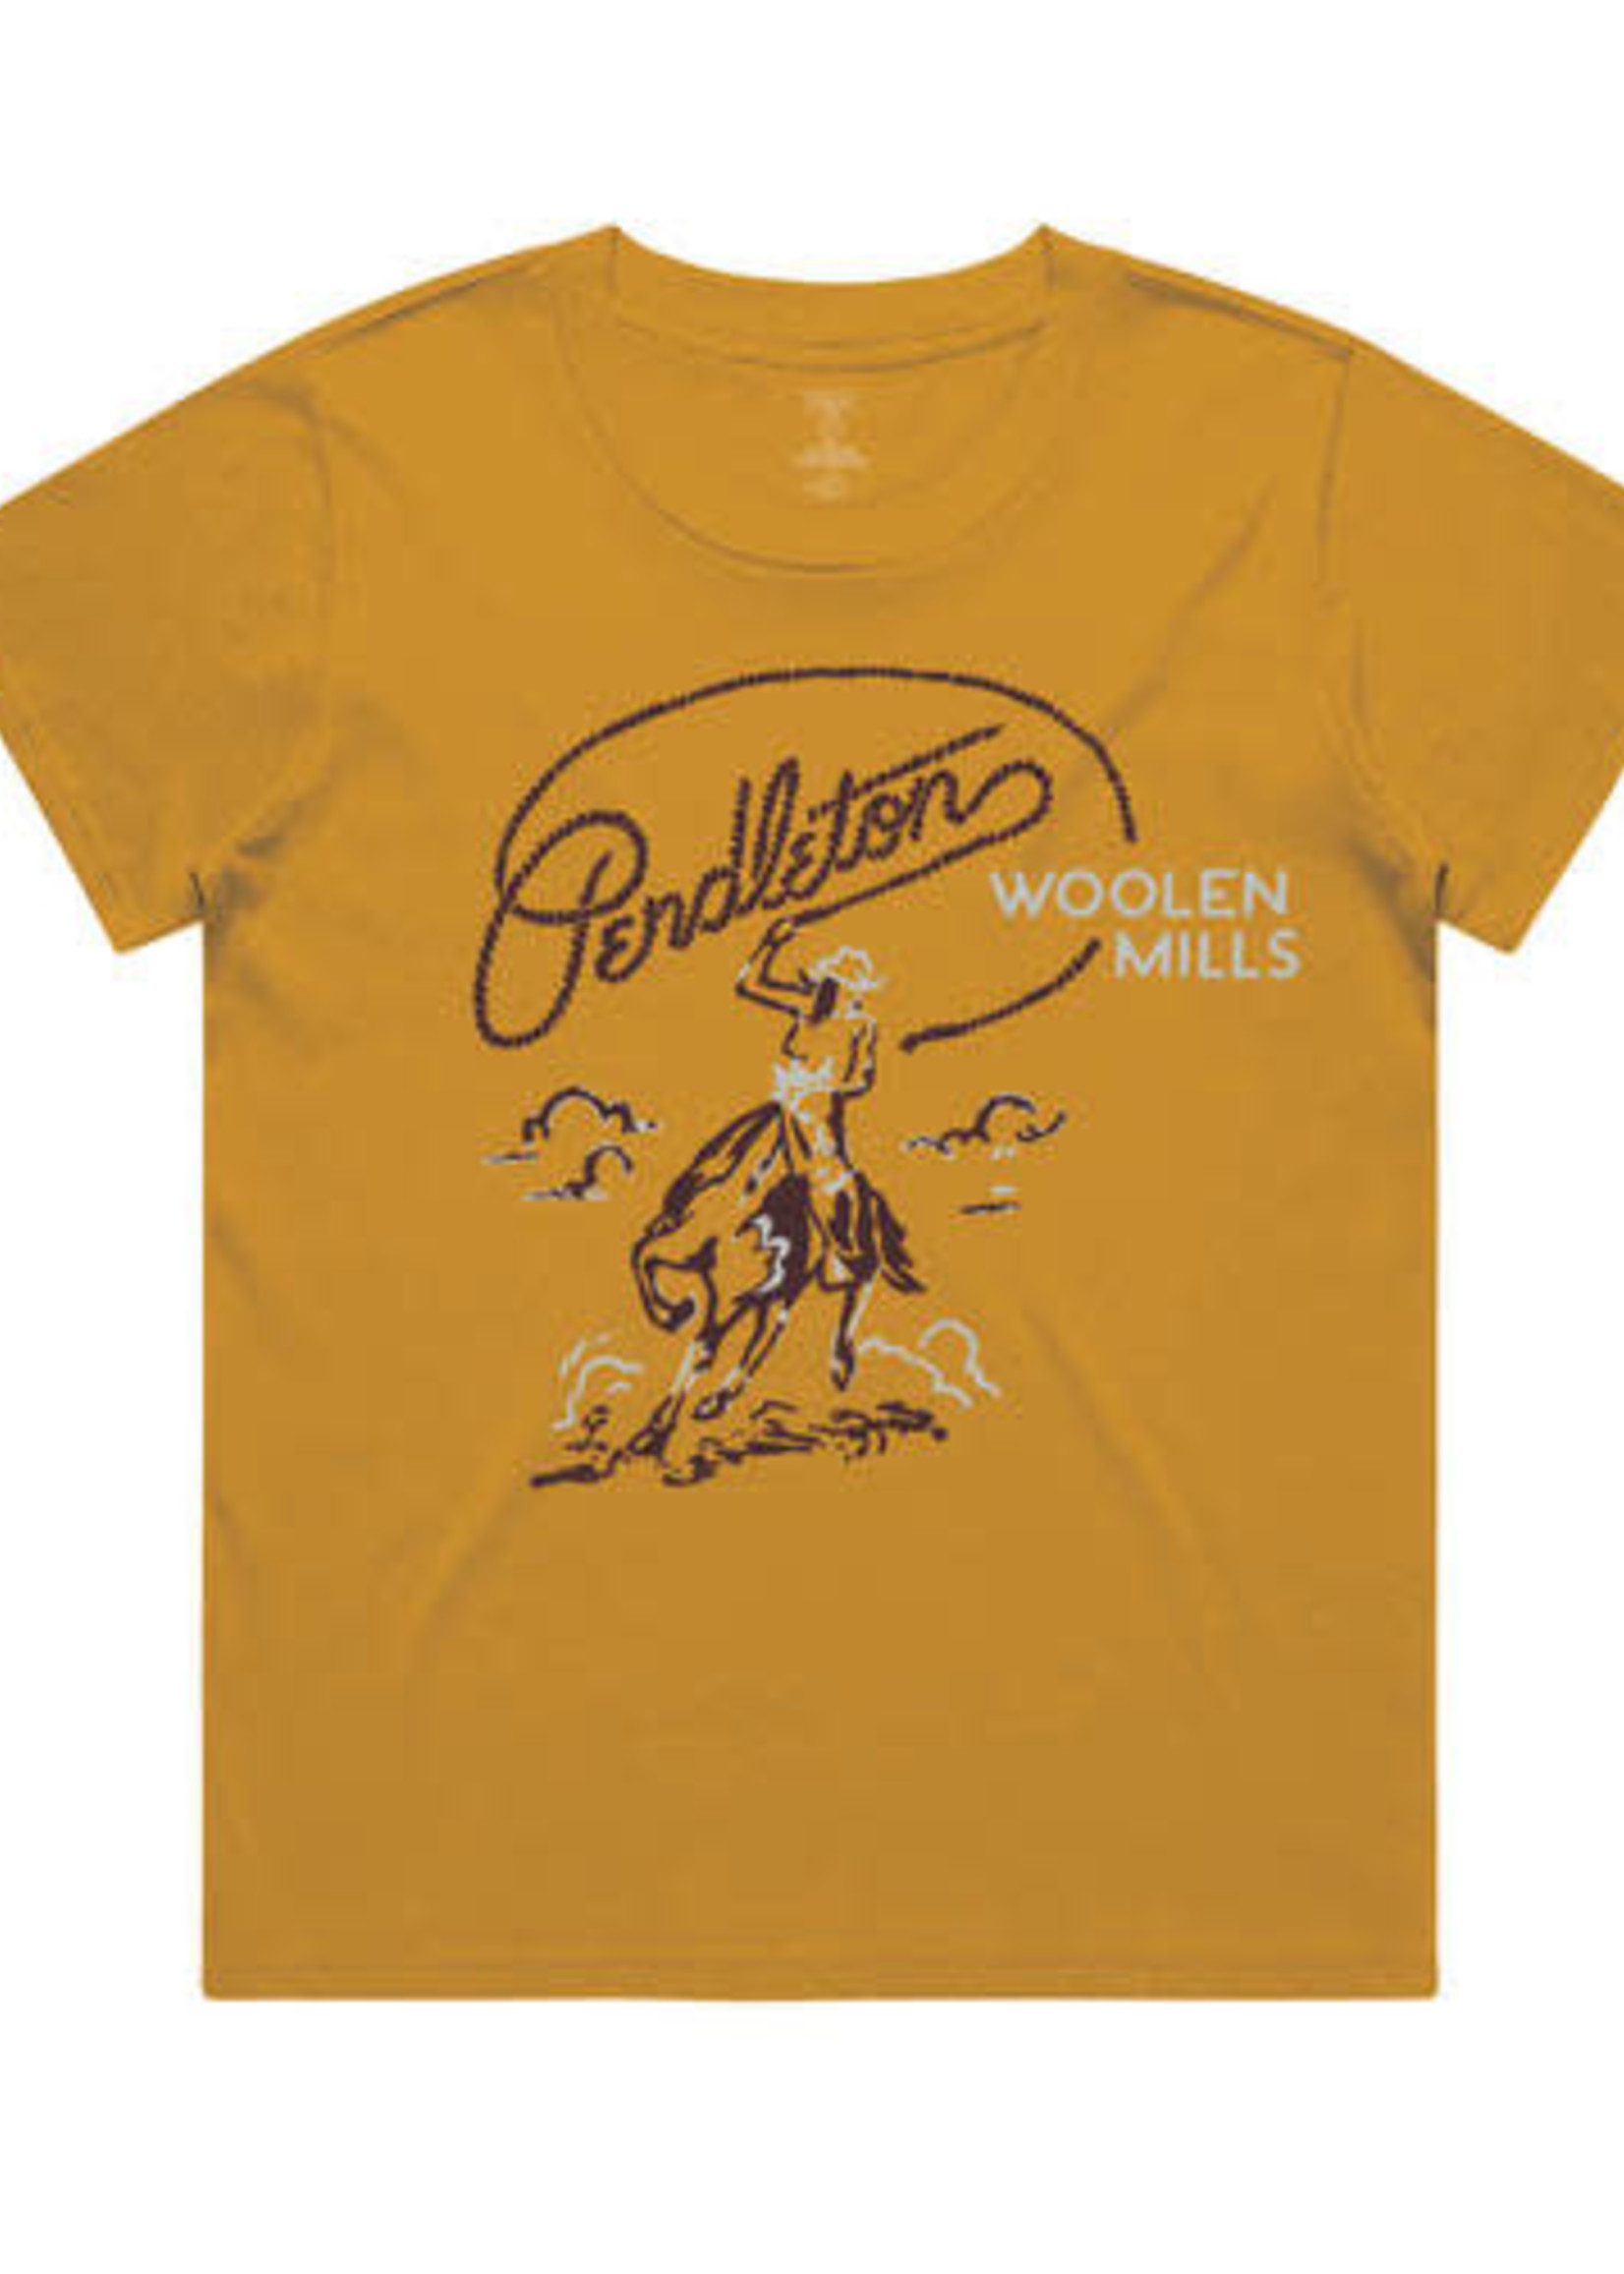 Pendleton Rodeo Cowgirl Graphic Tee